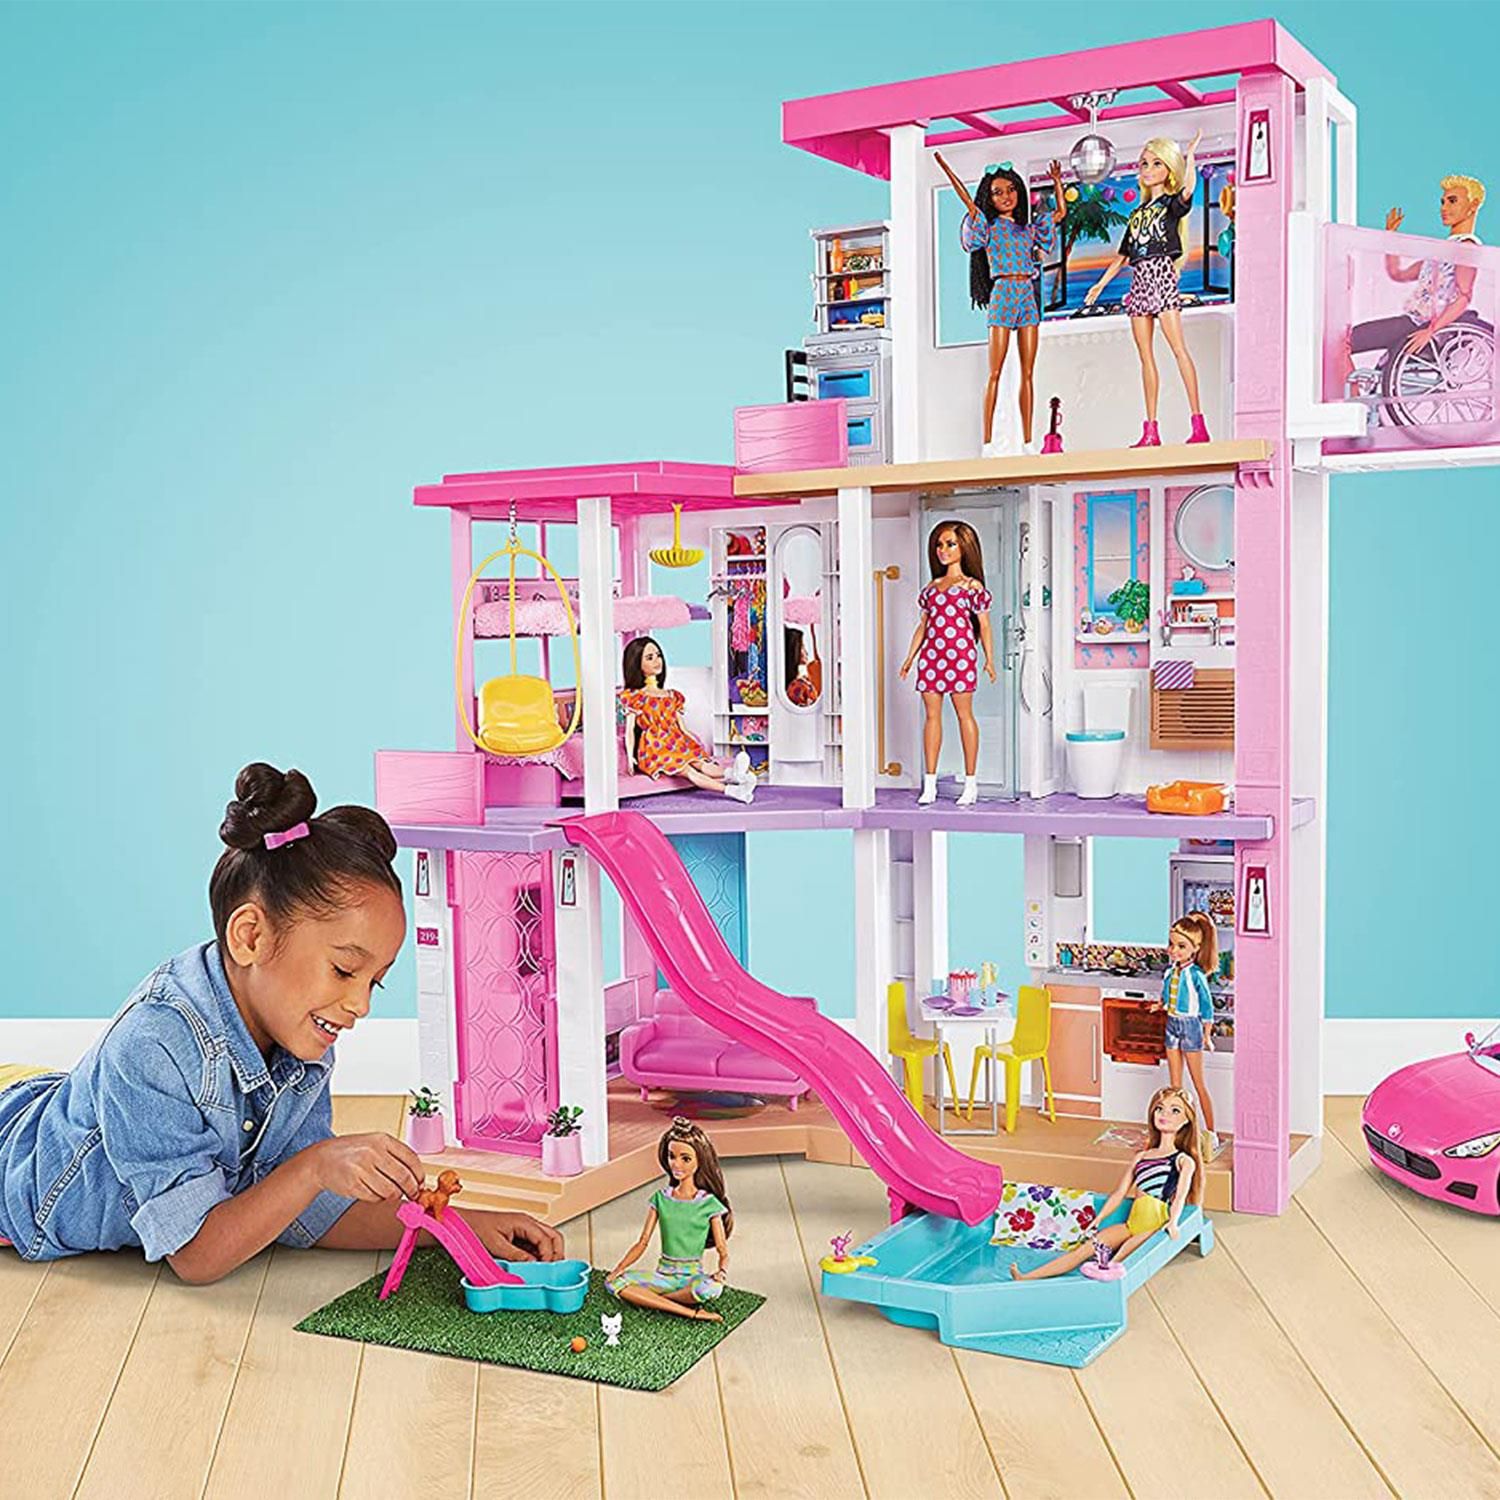 When young imaginations open the door to the Barbie Dreamhouse, they'll discover unlimited storytelling possibilities! Standing 43 inches tall and 41 inches wide, this dreamy dollhouse inspires 360-degree play with three floors and 10 indoor and outdoor living areas. Move right in and customize the space -- the grass area and pool can be placed in multiple configurations on the first and third floors, and the slide fits in four second-floor locations. After designing the layout, set the scene for any story with three songs, two soundscapes and customizable light settings! Then, double the fun with transforming furniture -- the BBQ grill reverses to reveal a dessert buffet, the entertainment centre reverses to reveal a pet play area, and a bunk bed folds down from the wall. Kids can play out any story, from an ordinary day to the ultimate get-together with a kitchen, living room, dining room, bedroom, bathroom, pool, balcony, party room and more. Lift and lower Barbie doll and her friends in the working elevator, fill the pool with water to make a splash, soak up some sun on the third-floor balcony and rooftop deck, and host a pet playdate with a puppy pool and slide. Storytelling accessories -- over 75 of them! -- feature realistic touches and textures that bring any Barbie story to life. With cool customizations and so many storytelling opportunities, kids ages 3 years old and up will move right into the Barbie Dreamhouse and make it their own! Assembly required. Dolls, vehicle and wheelchair not included. Requires 3 AA (LR6) alkaline batteries (not included). Colours and decorations may vary.